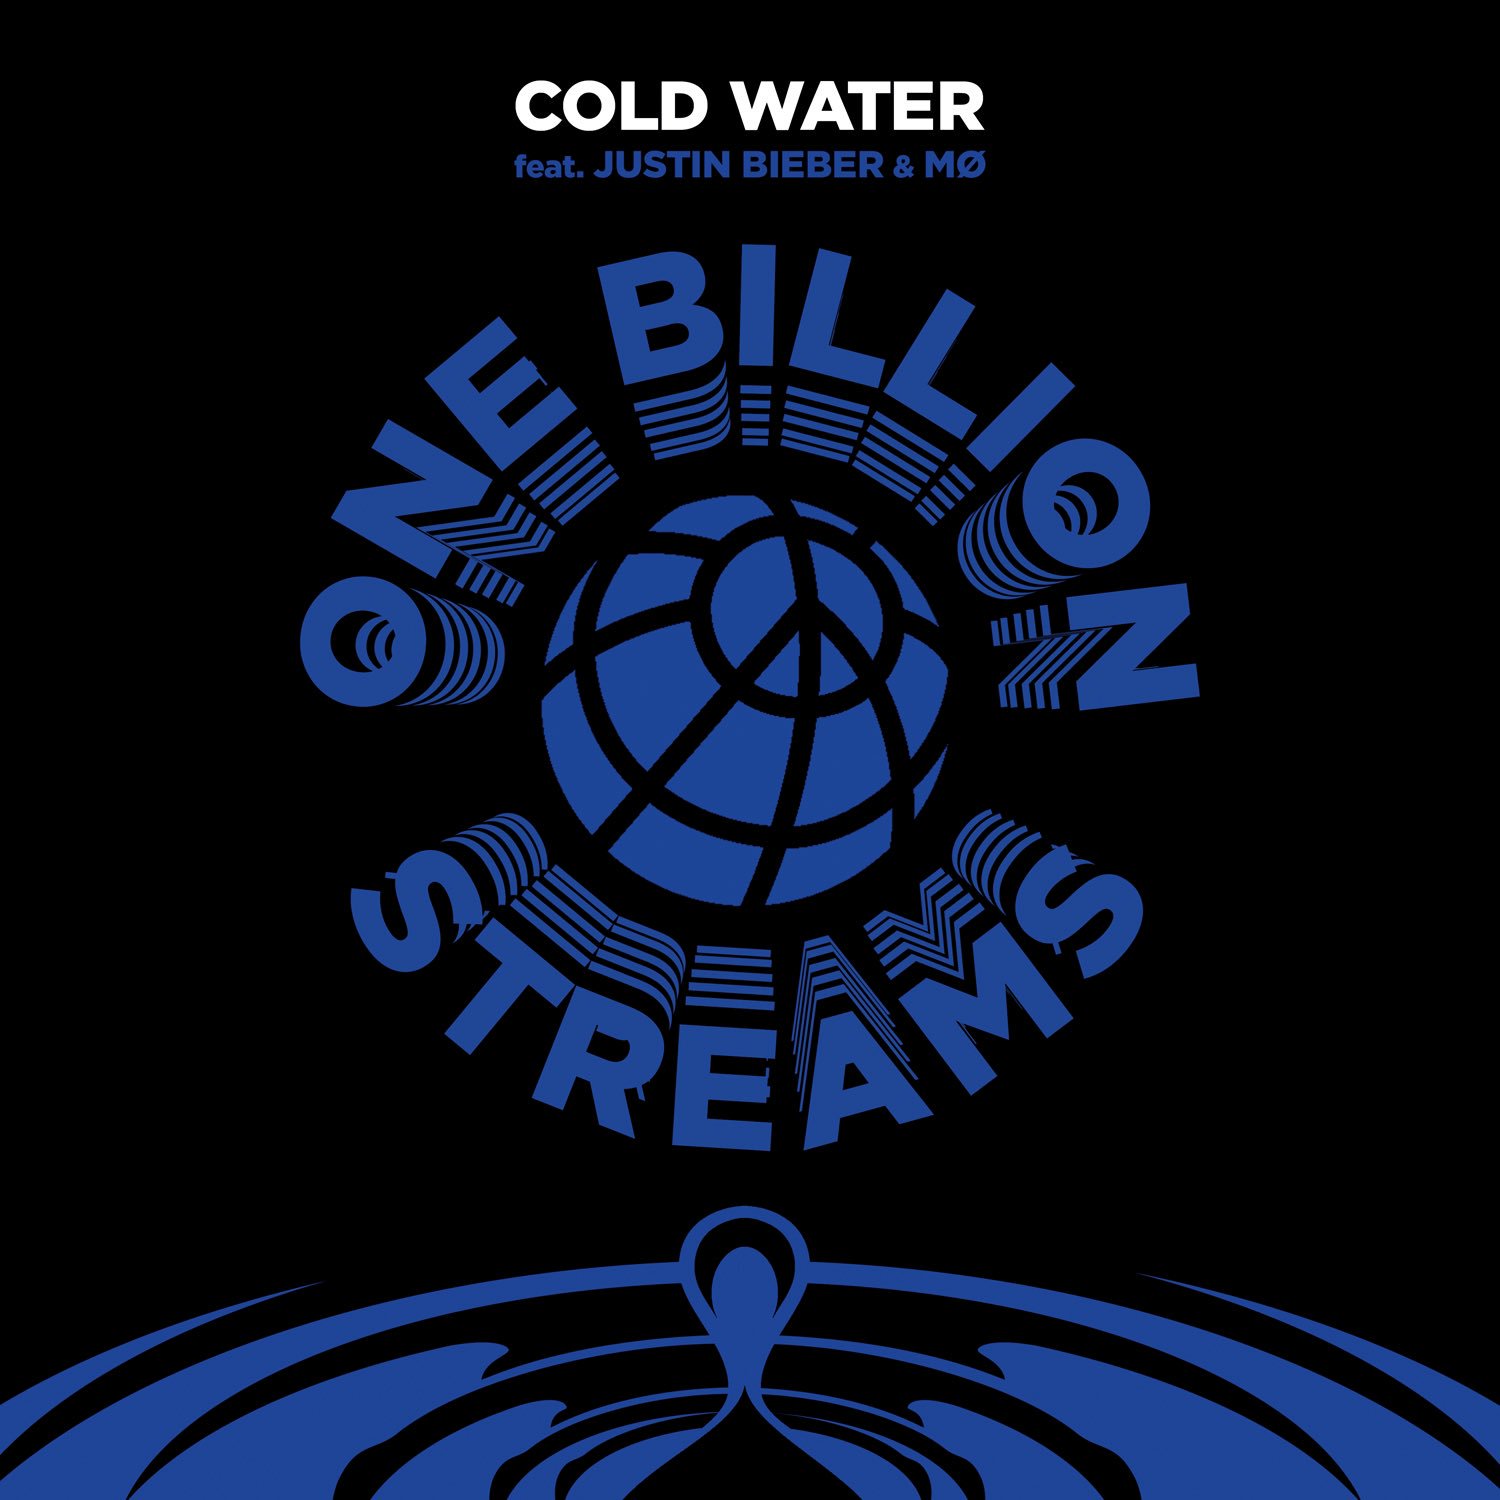 Diplo Rt Majorlazer Cold Water Just Passed 1 Billion Streams On Spotify Making Us The 6th Artist To Have Two Songs With This Milestone A Hug Twitter